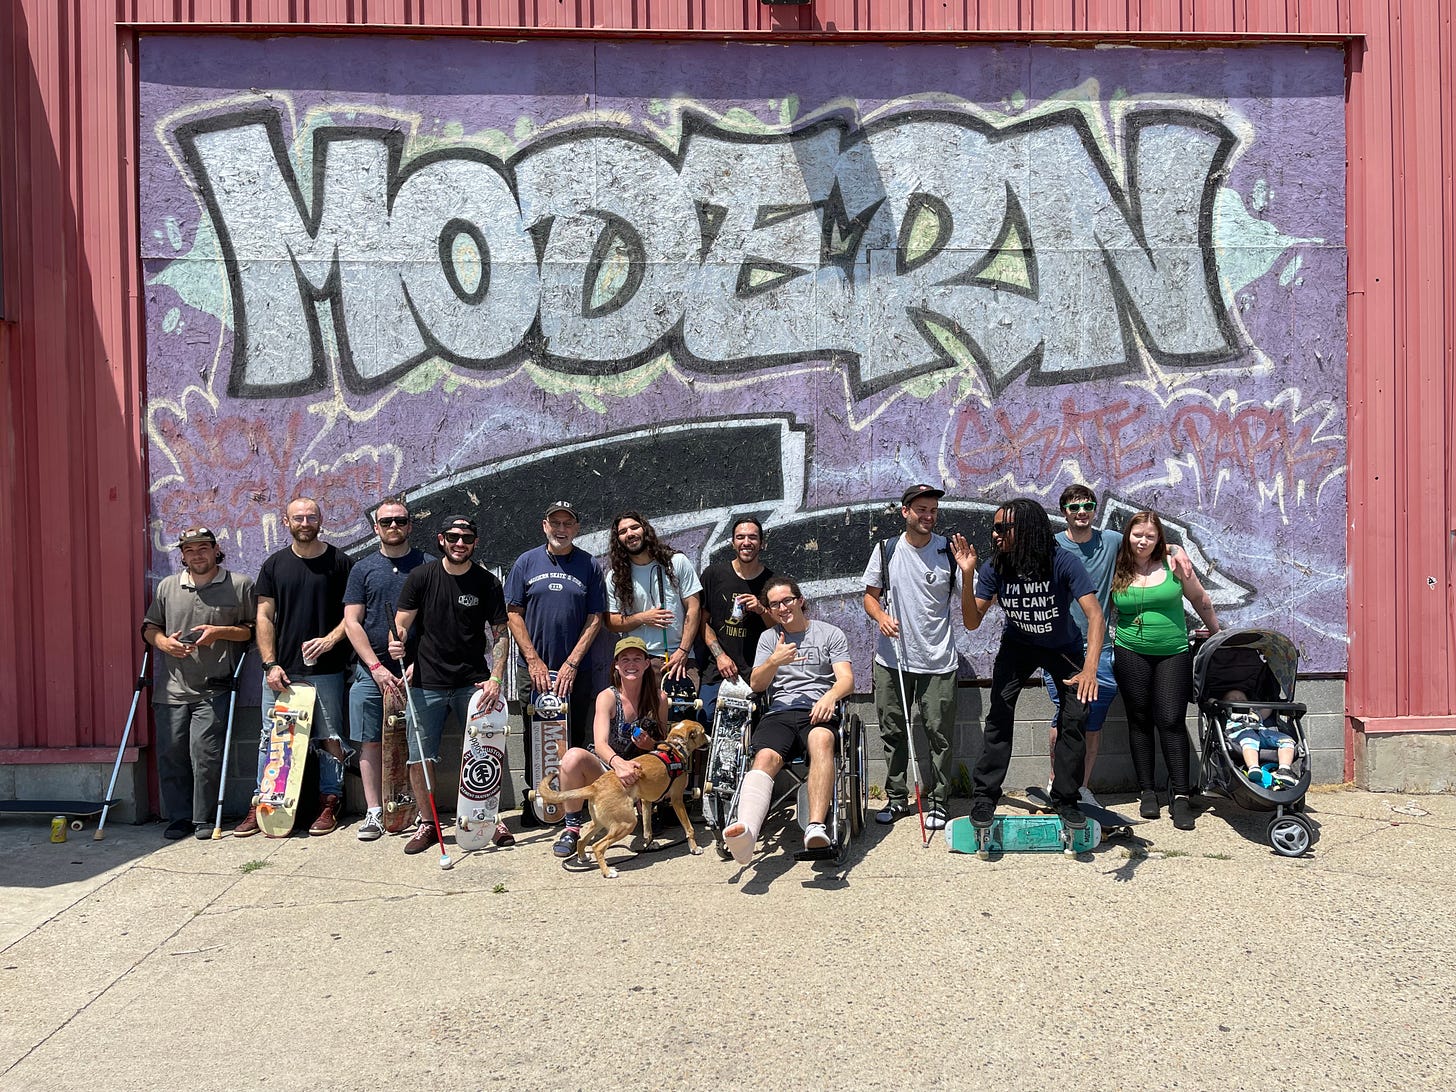 The largest gathering of of Blind and Adaptive Skaters in the History of the World! pictures in front of rad graffiti saying Modern skate